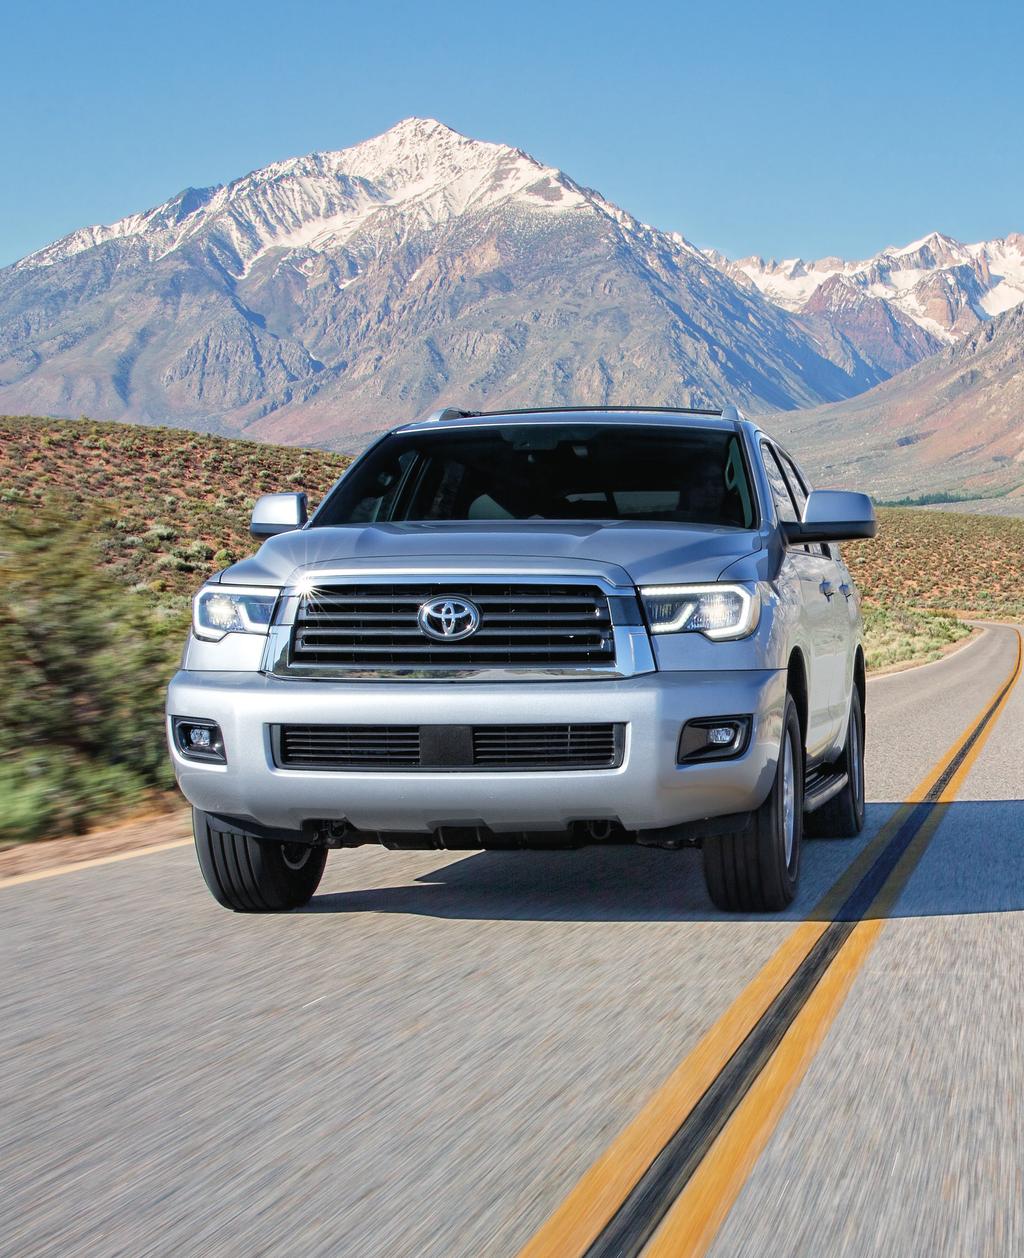 THE ROAD WILL CHANGE, BUT THE DRIVE NEVER WILL Sequoia offers the toughness of a truck in the body of a versatile and sophisticated SUV, giving you